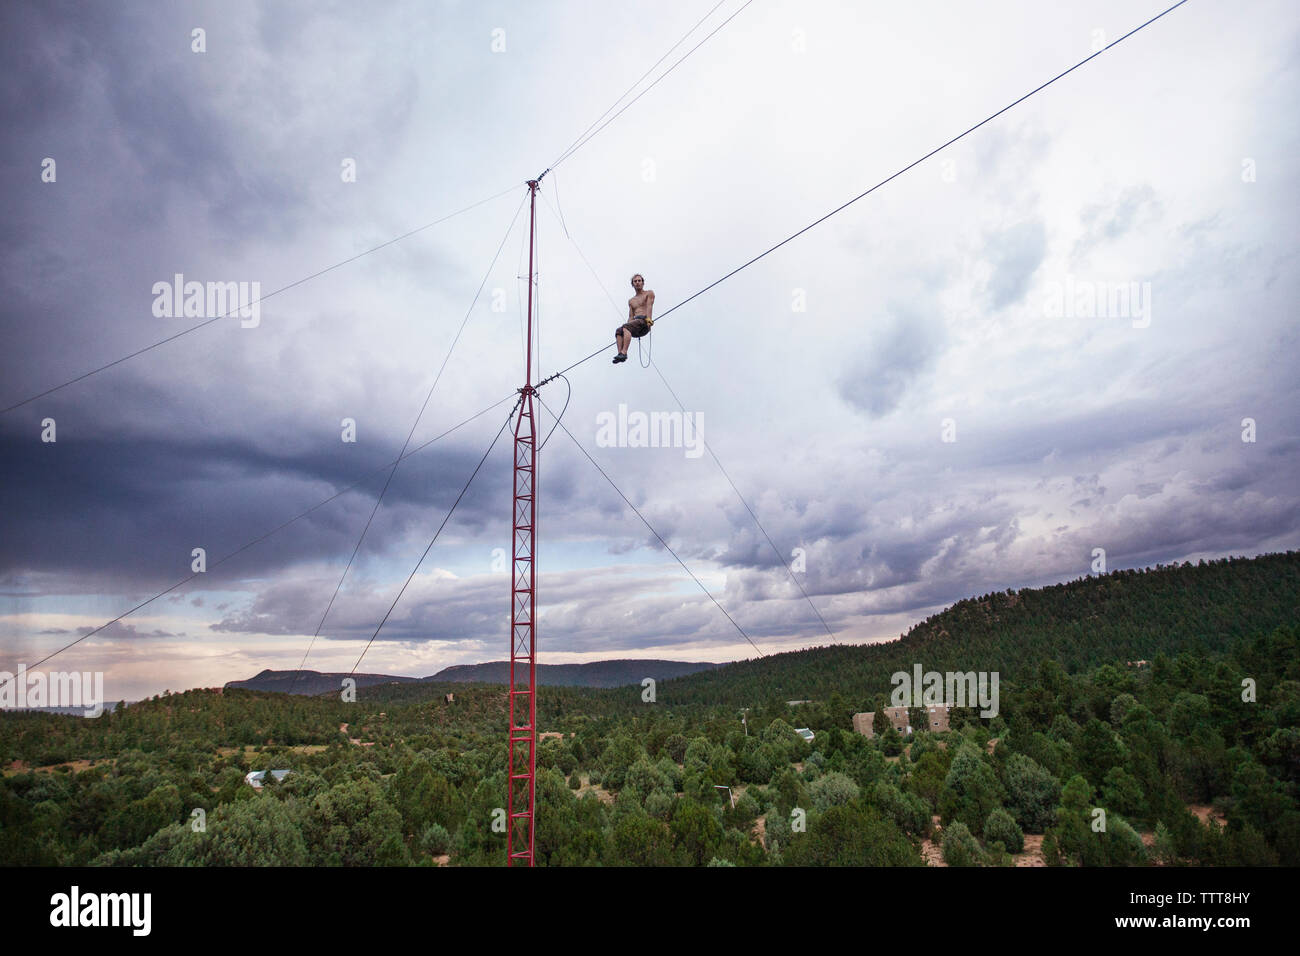 Low angle view of man sitting on tight rope against cloudy sky Stock Photo